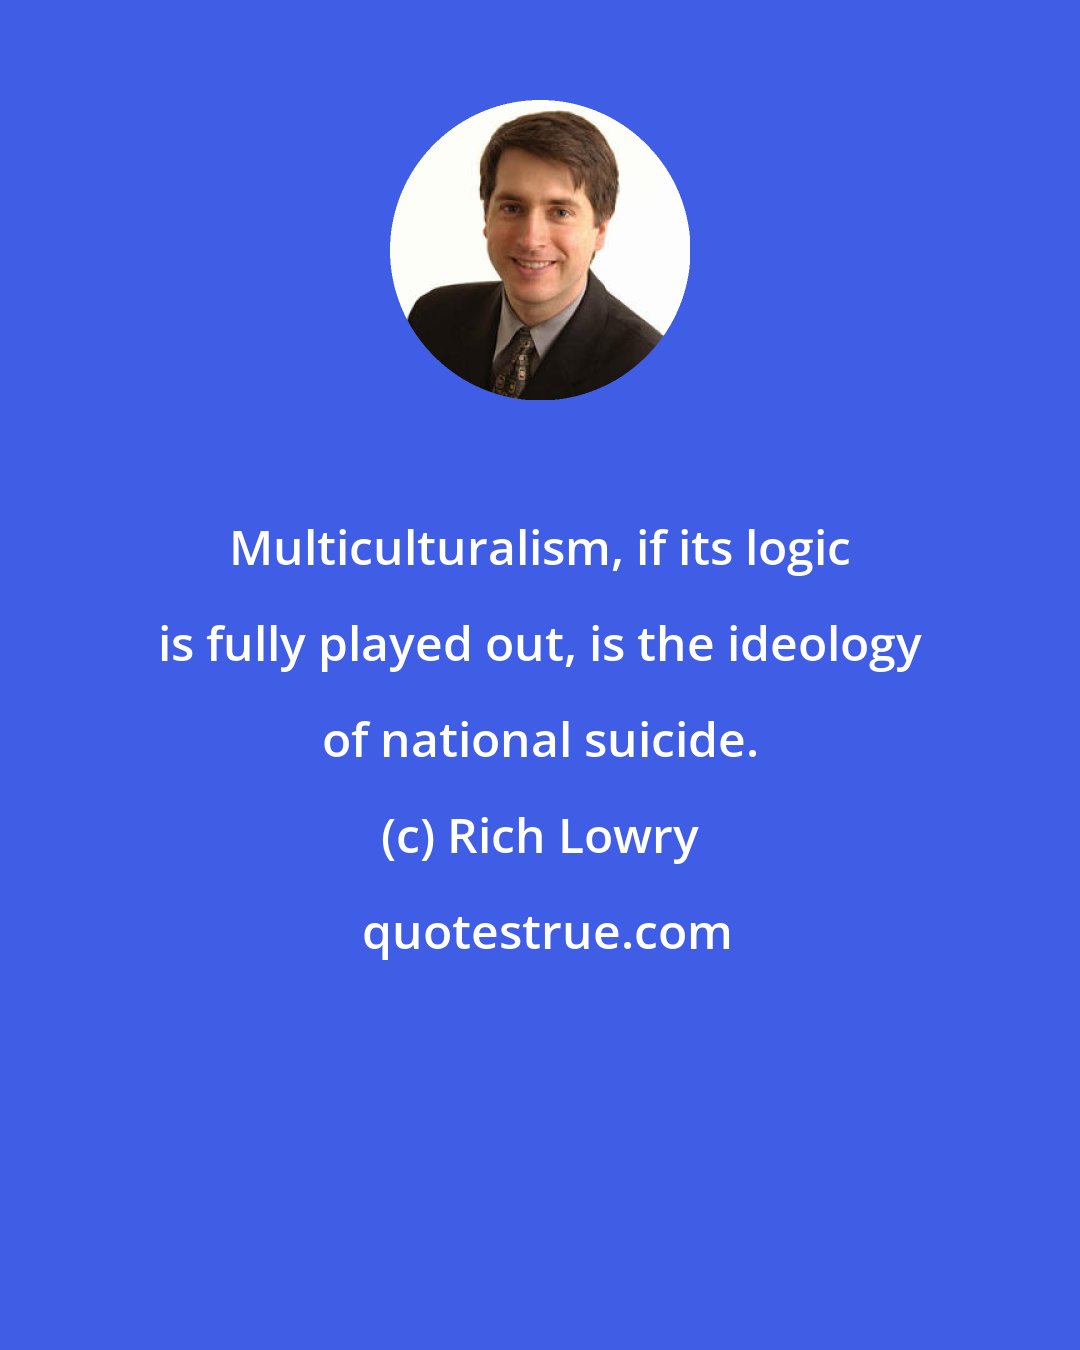 Rich Lowry: Multiculturalism, if its logic is fully played out, is the ideology of national suicide.